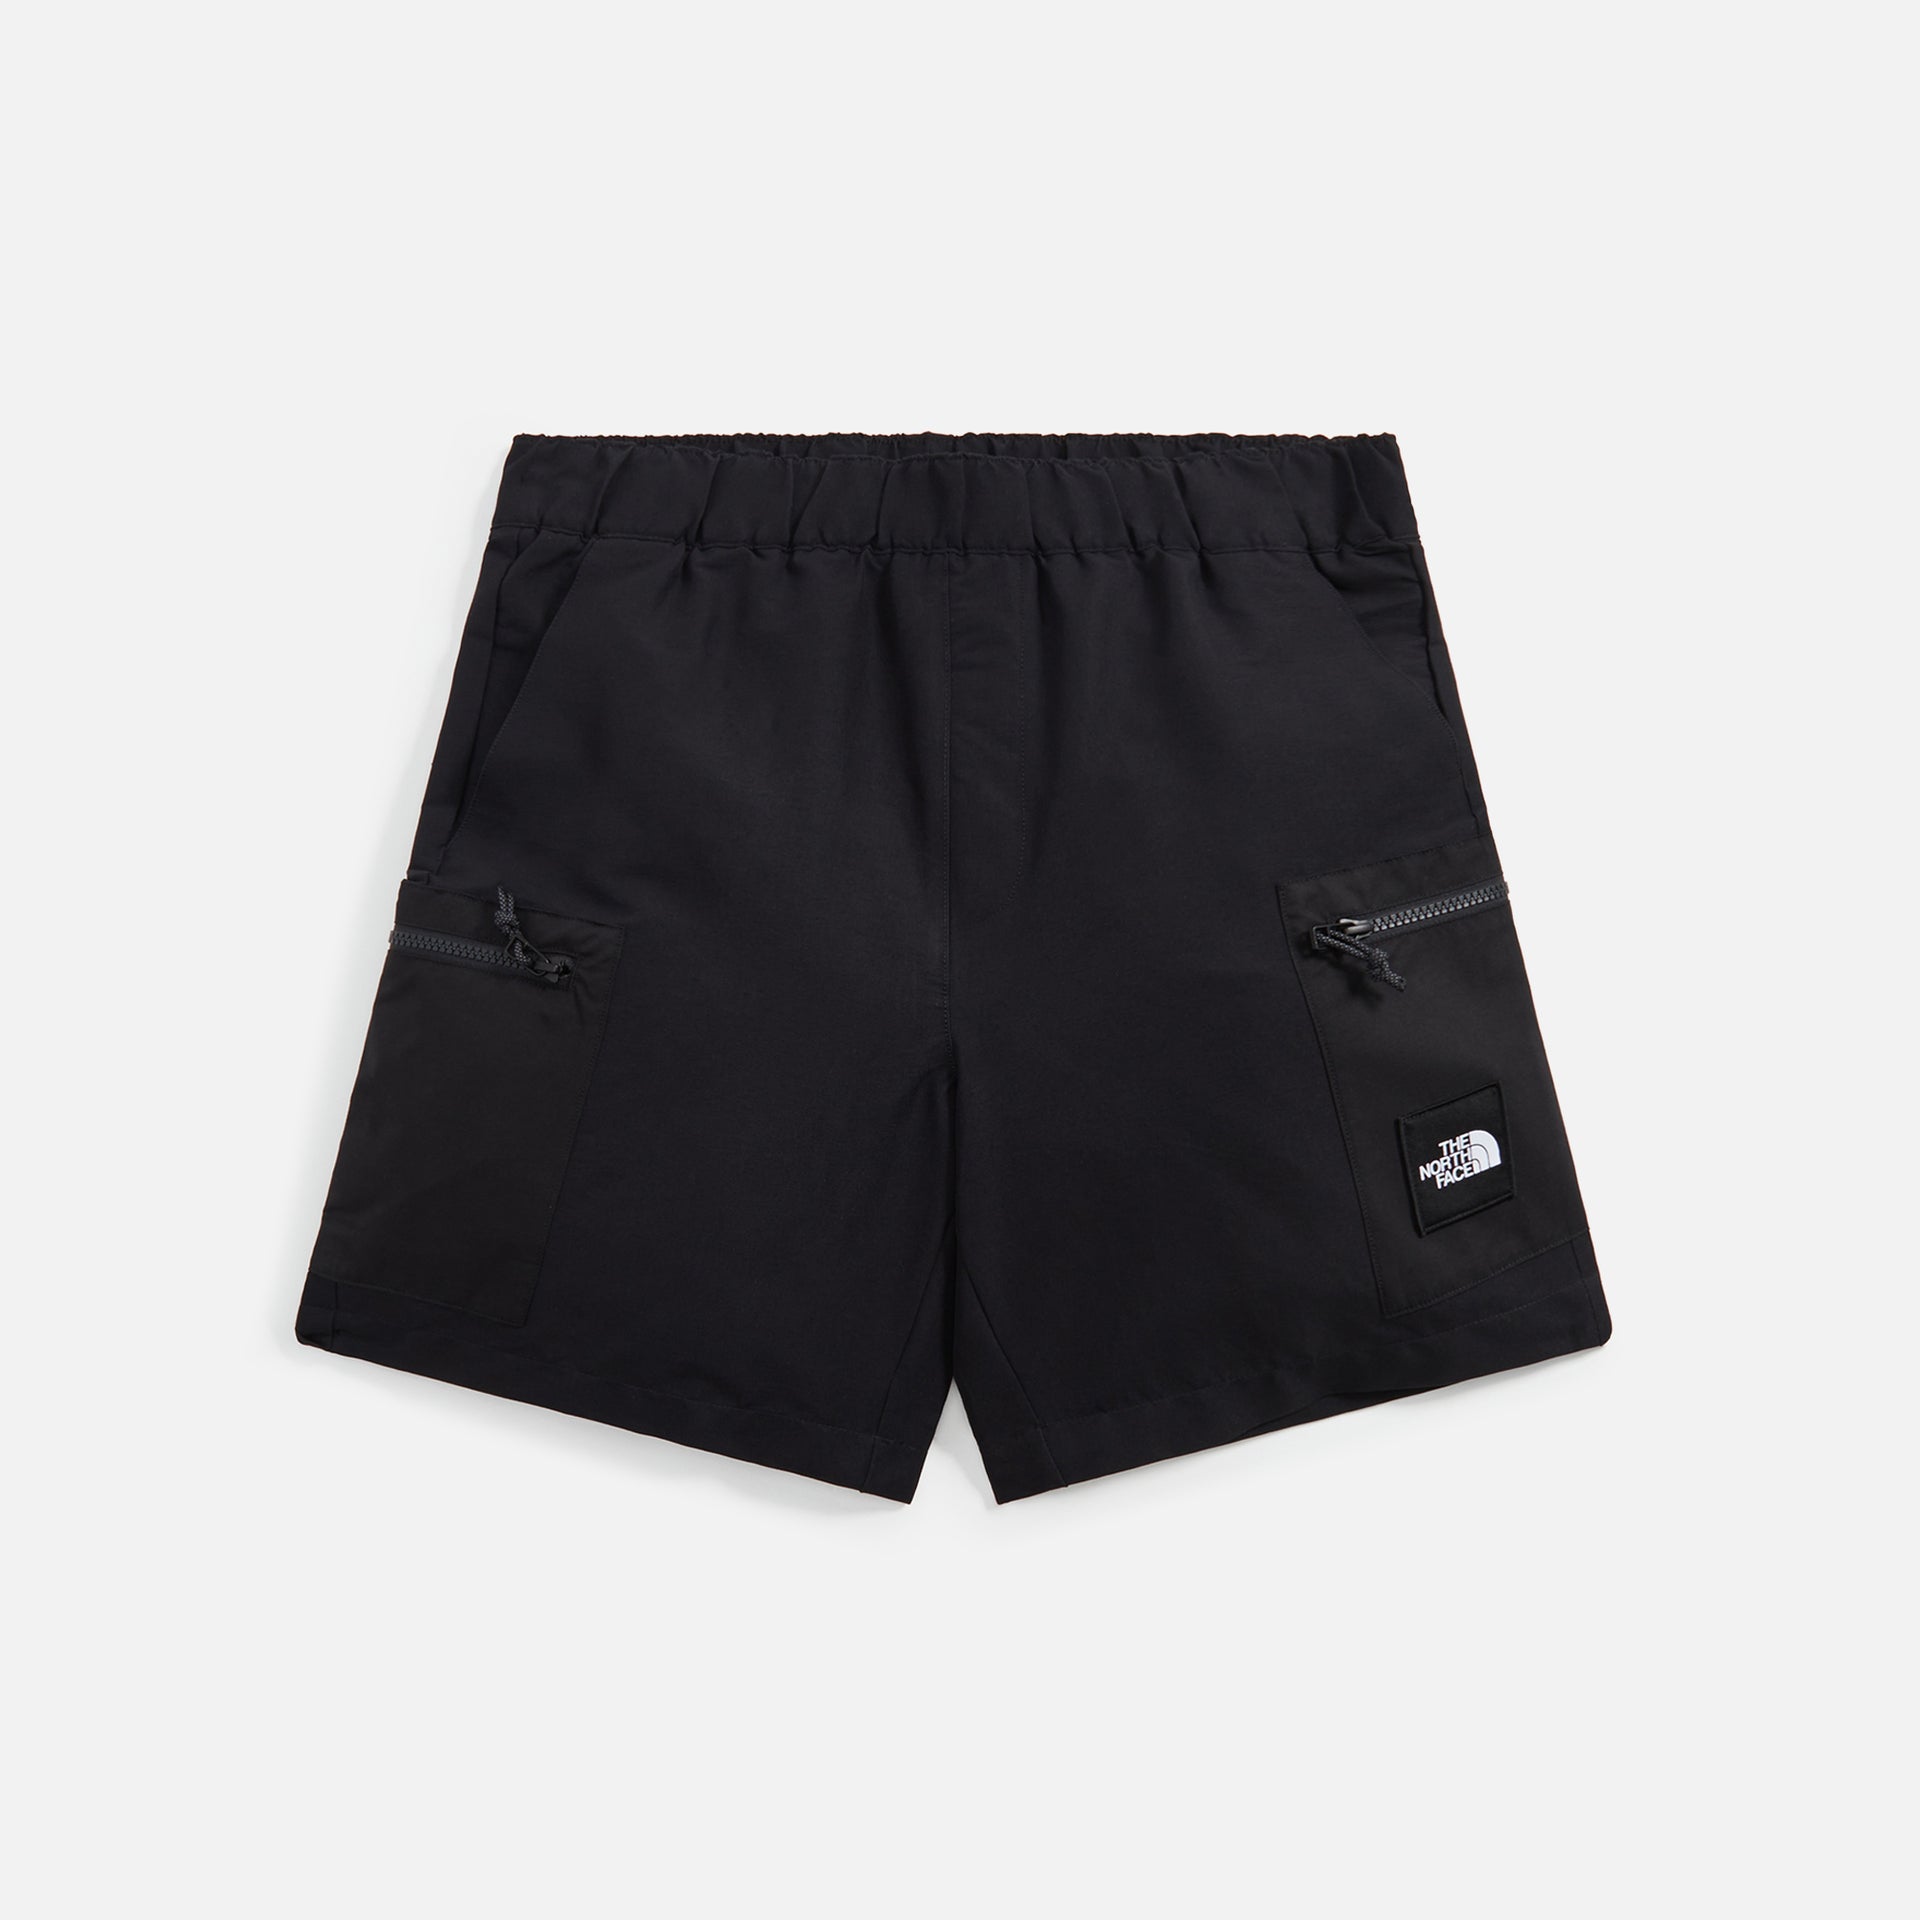 The North Face BB New Cargo Shorts - Black